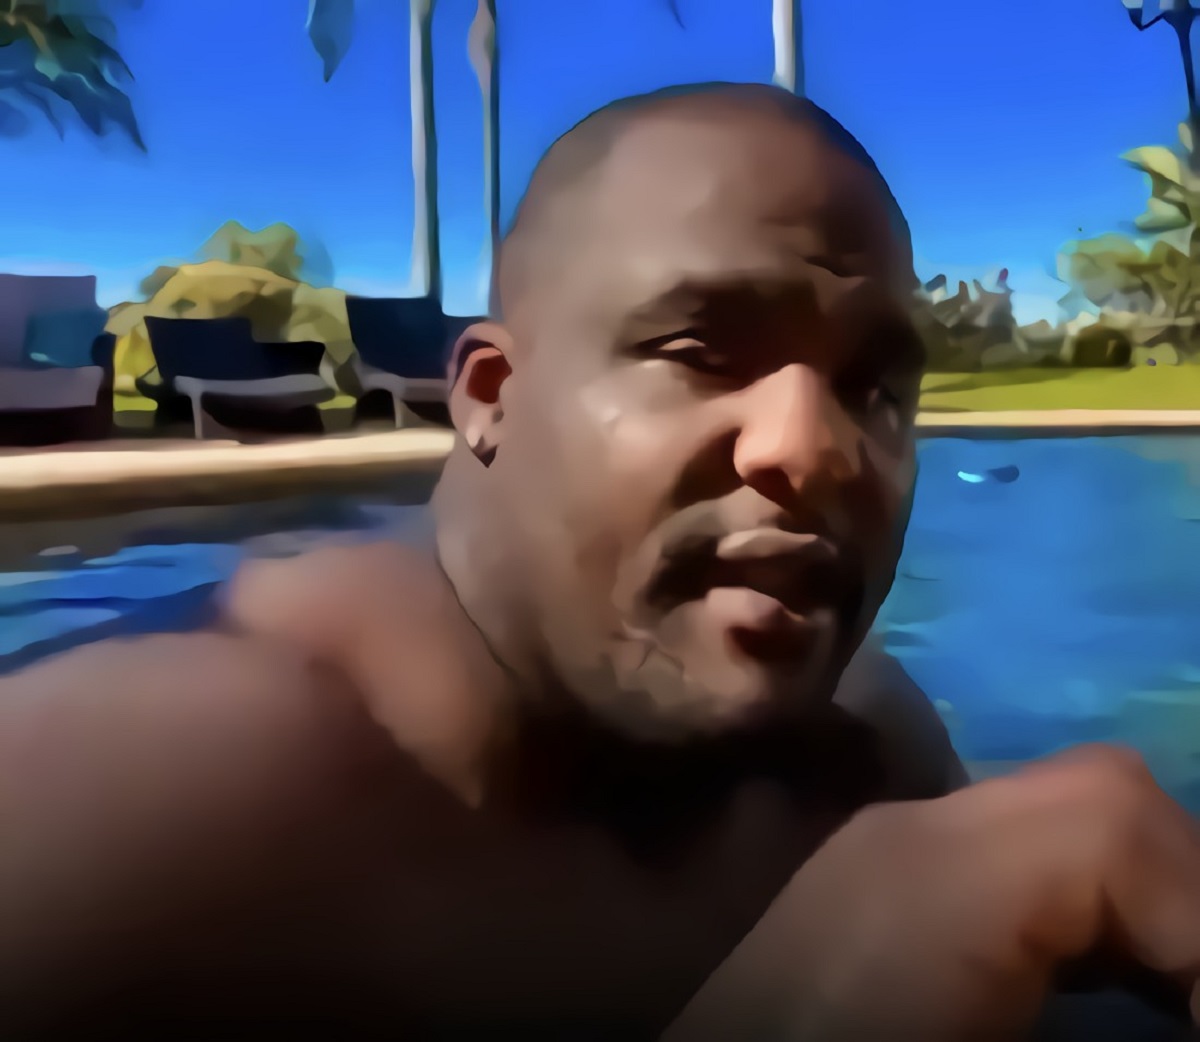 Glen Davis' Butt While Swimming Naked in 'Have a Cheeky Day' Video Goes Viral